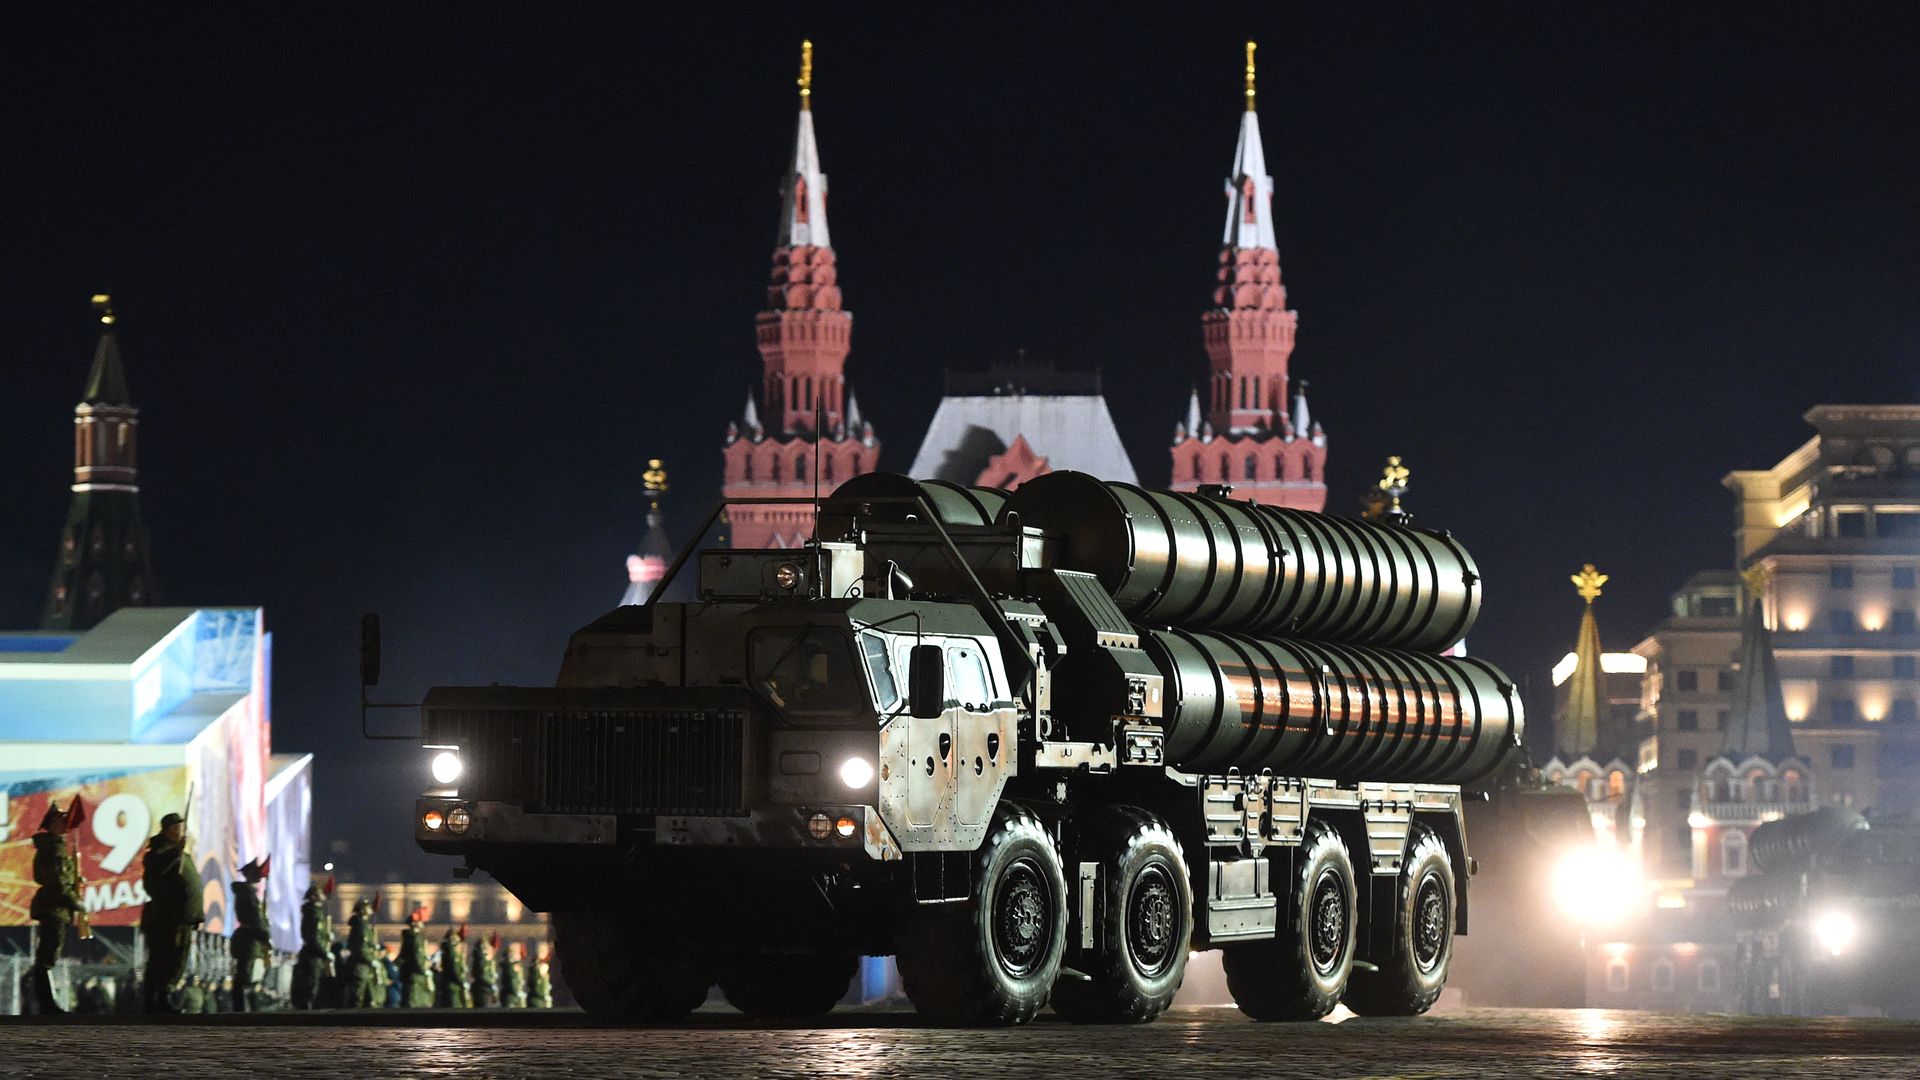 Russia's Russian S-400 Triumph air defence missile system rides through Red Square in Moscow during the Victory Day military parade night training on May 3, 2017